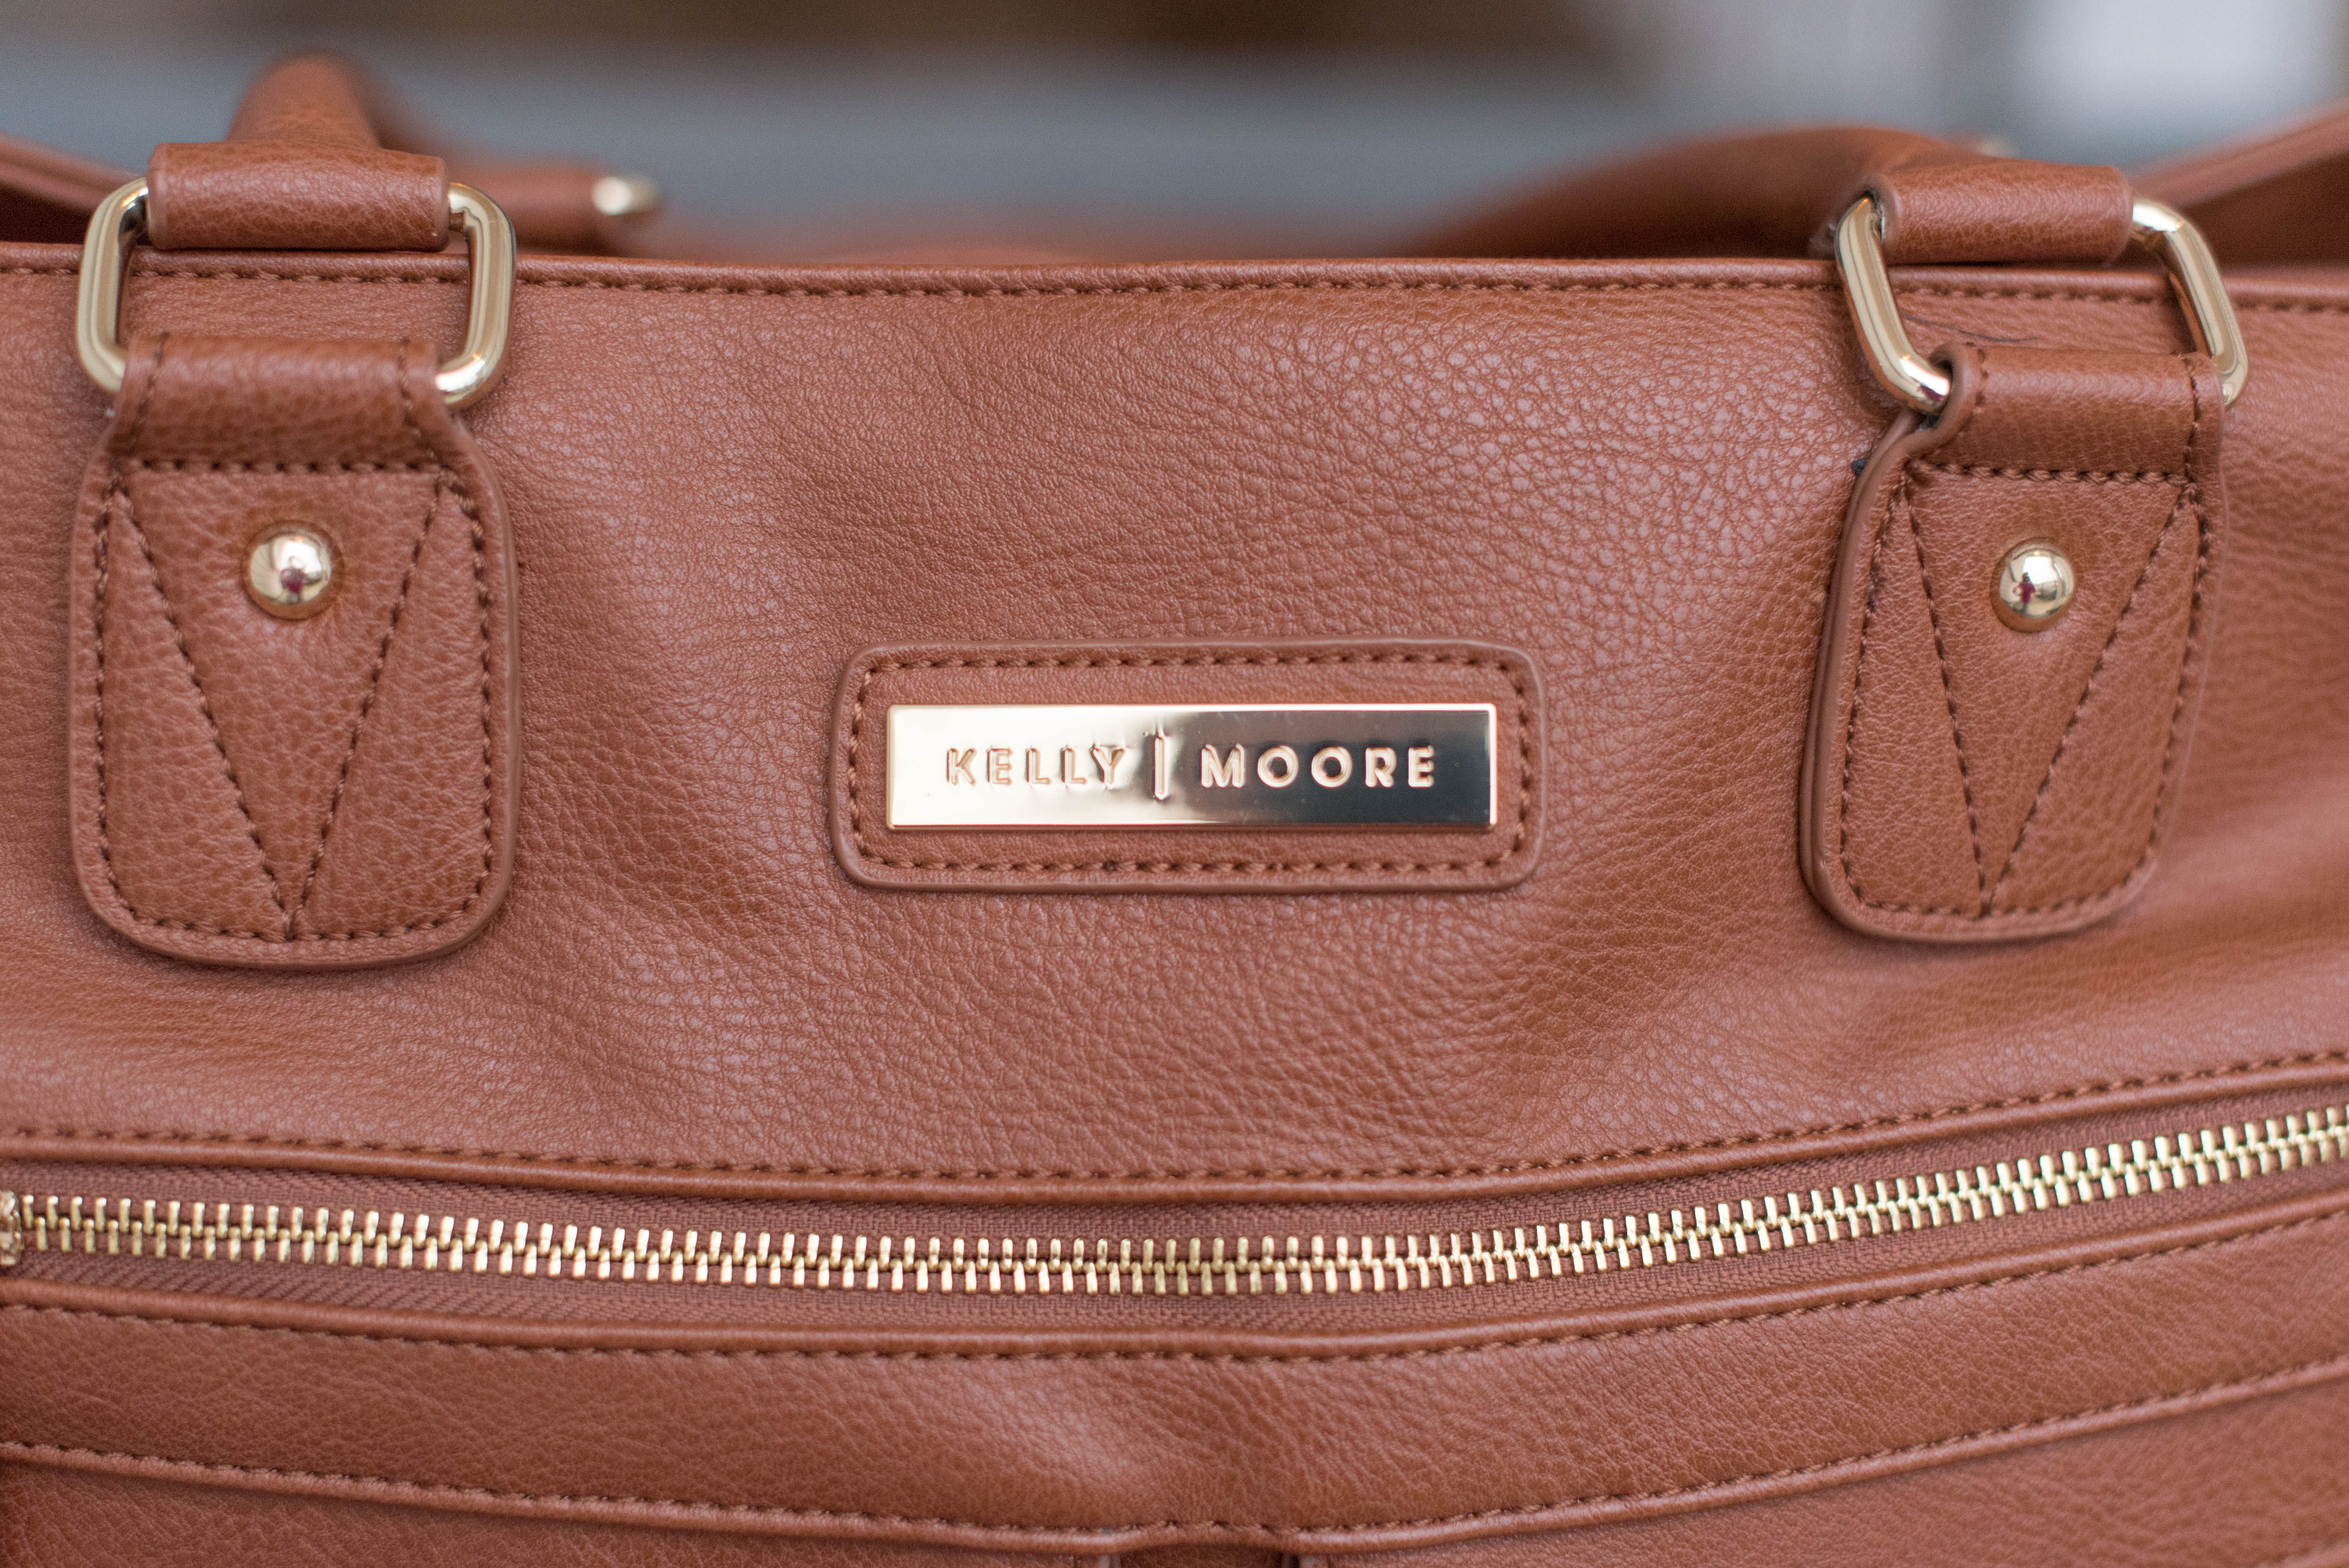 London Wedding Photographer  Kelly Moore Bag Review: The Juju